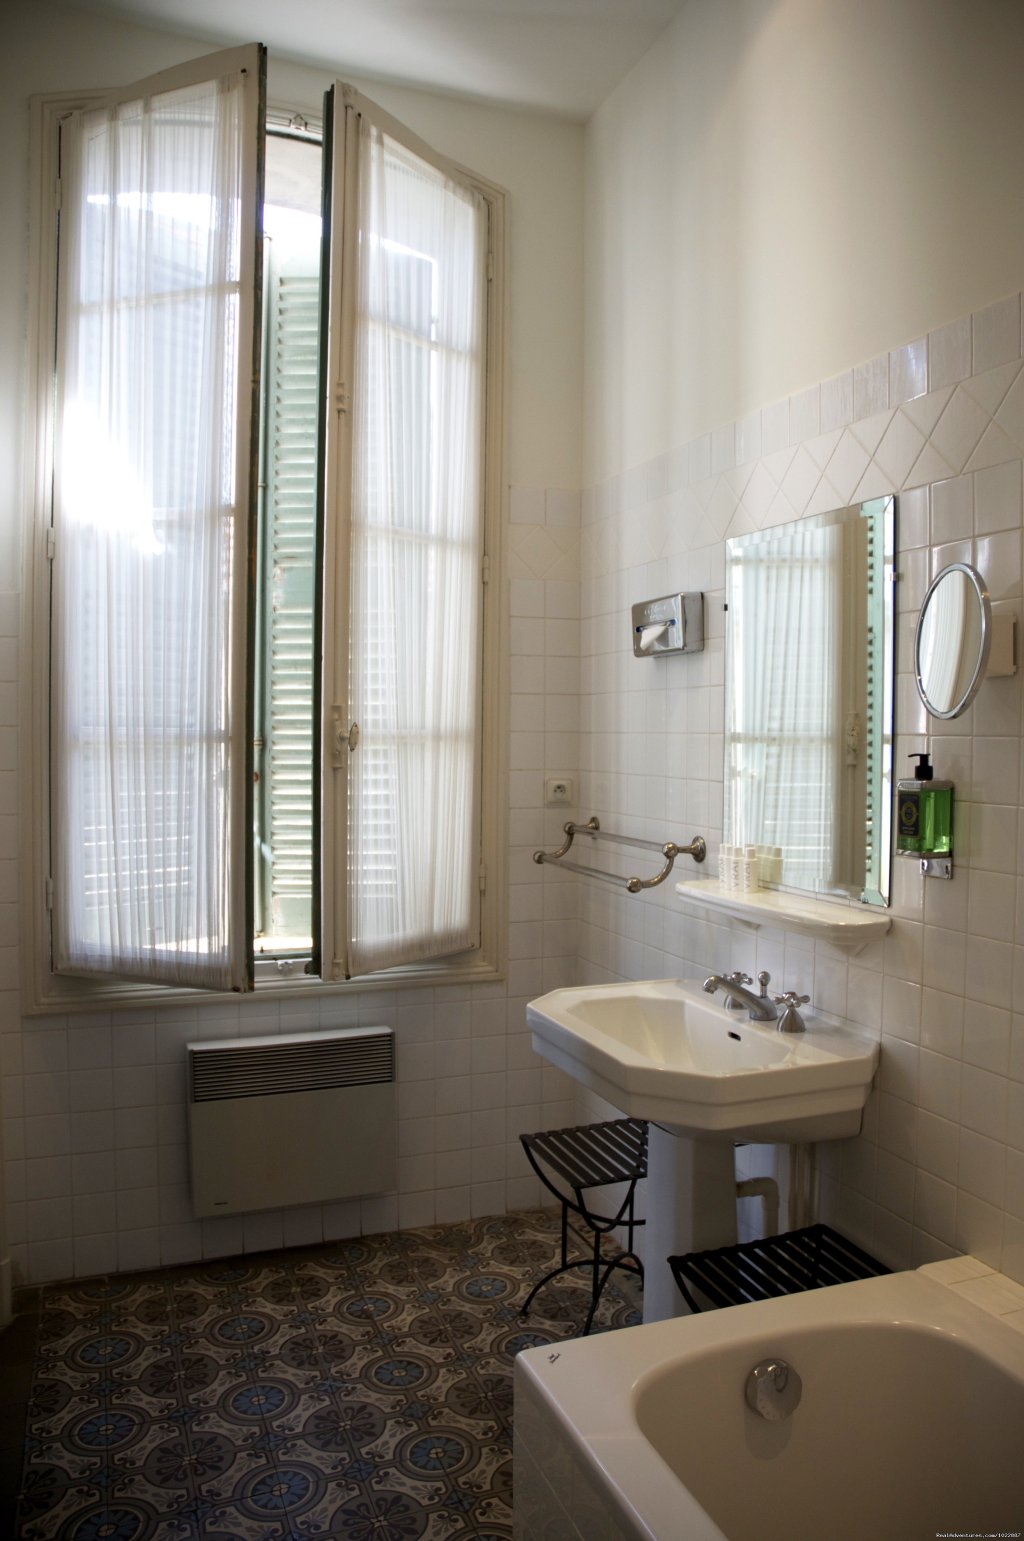 Bathroom of a SUPERIOR room | GRAND HOTEL NORD-PINUS a hotel with a soul | Image #6/24 | 